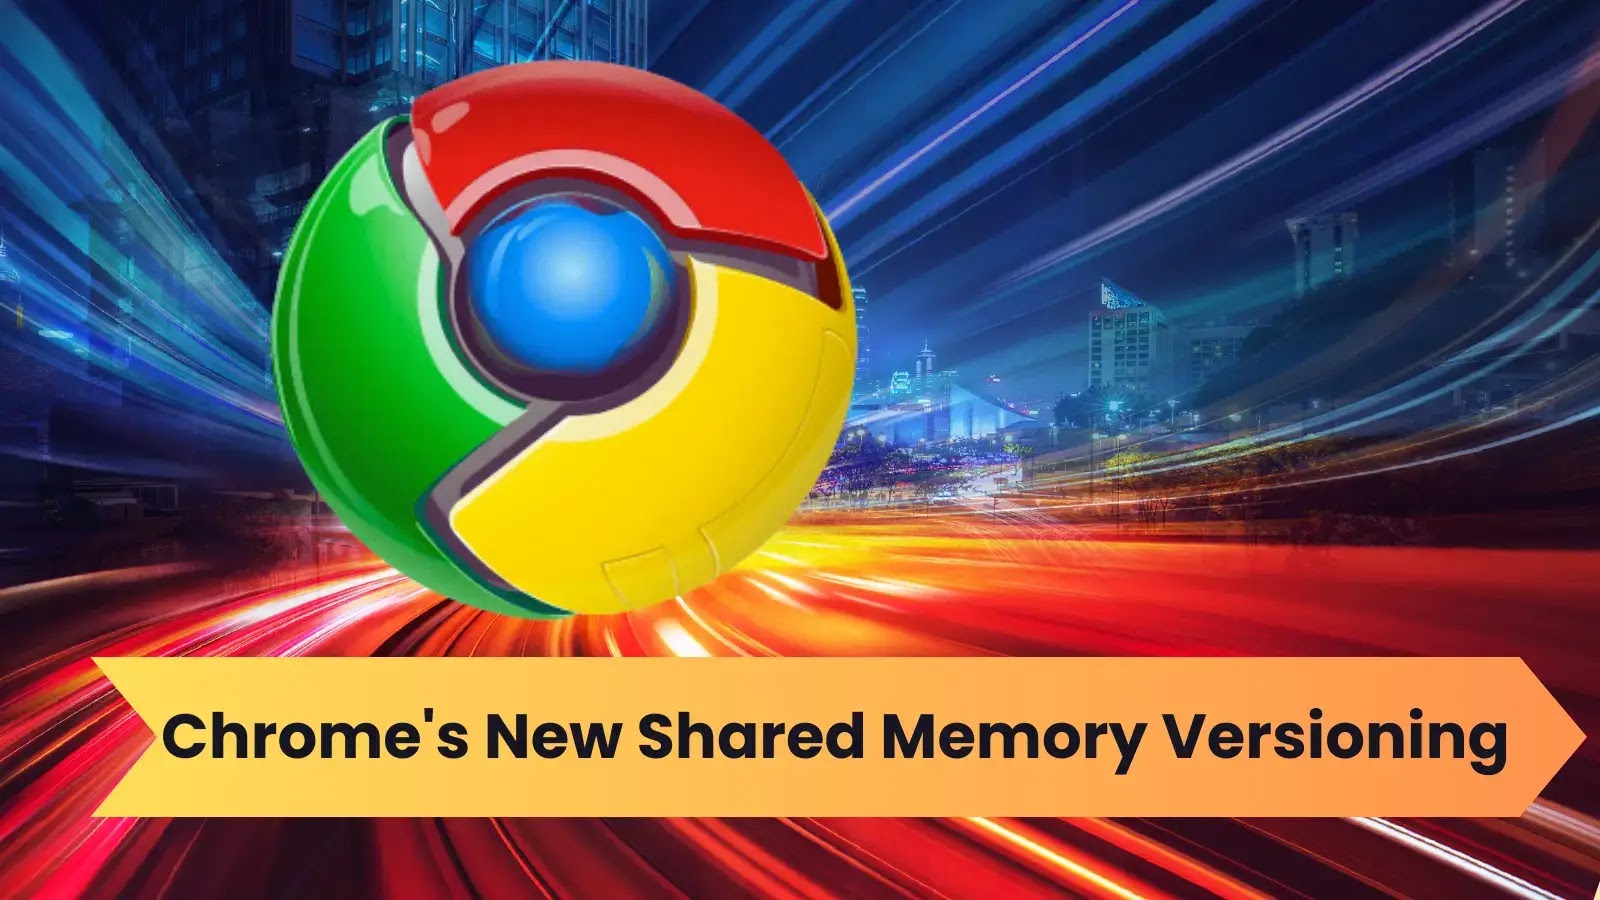 Chrome Introduced Shared Memory Versioning to Enhance Browser Performance